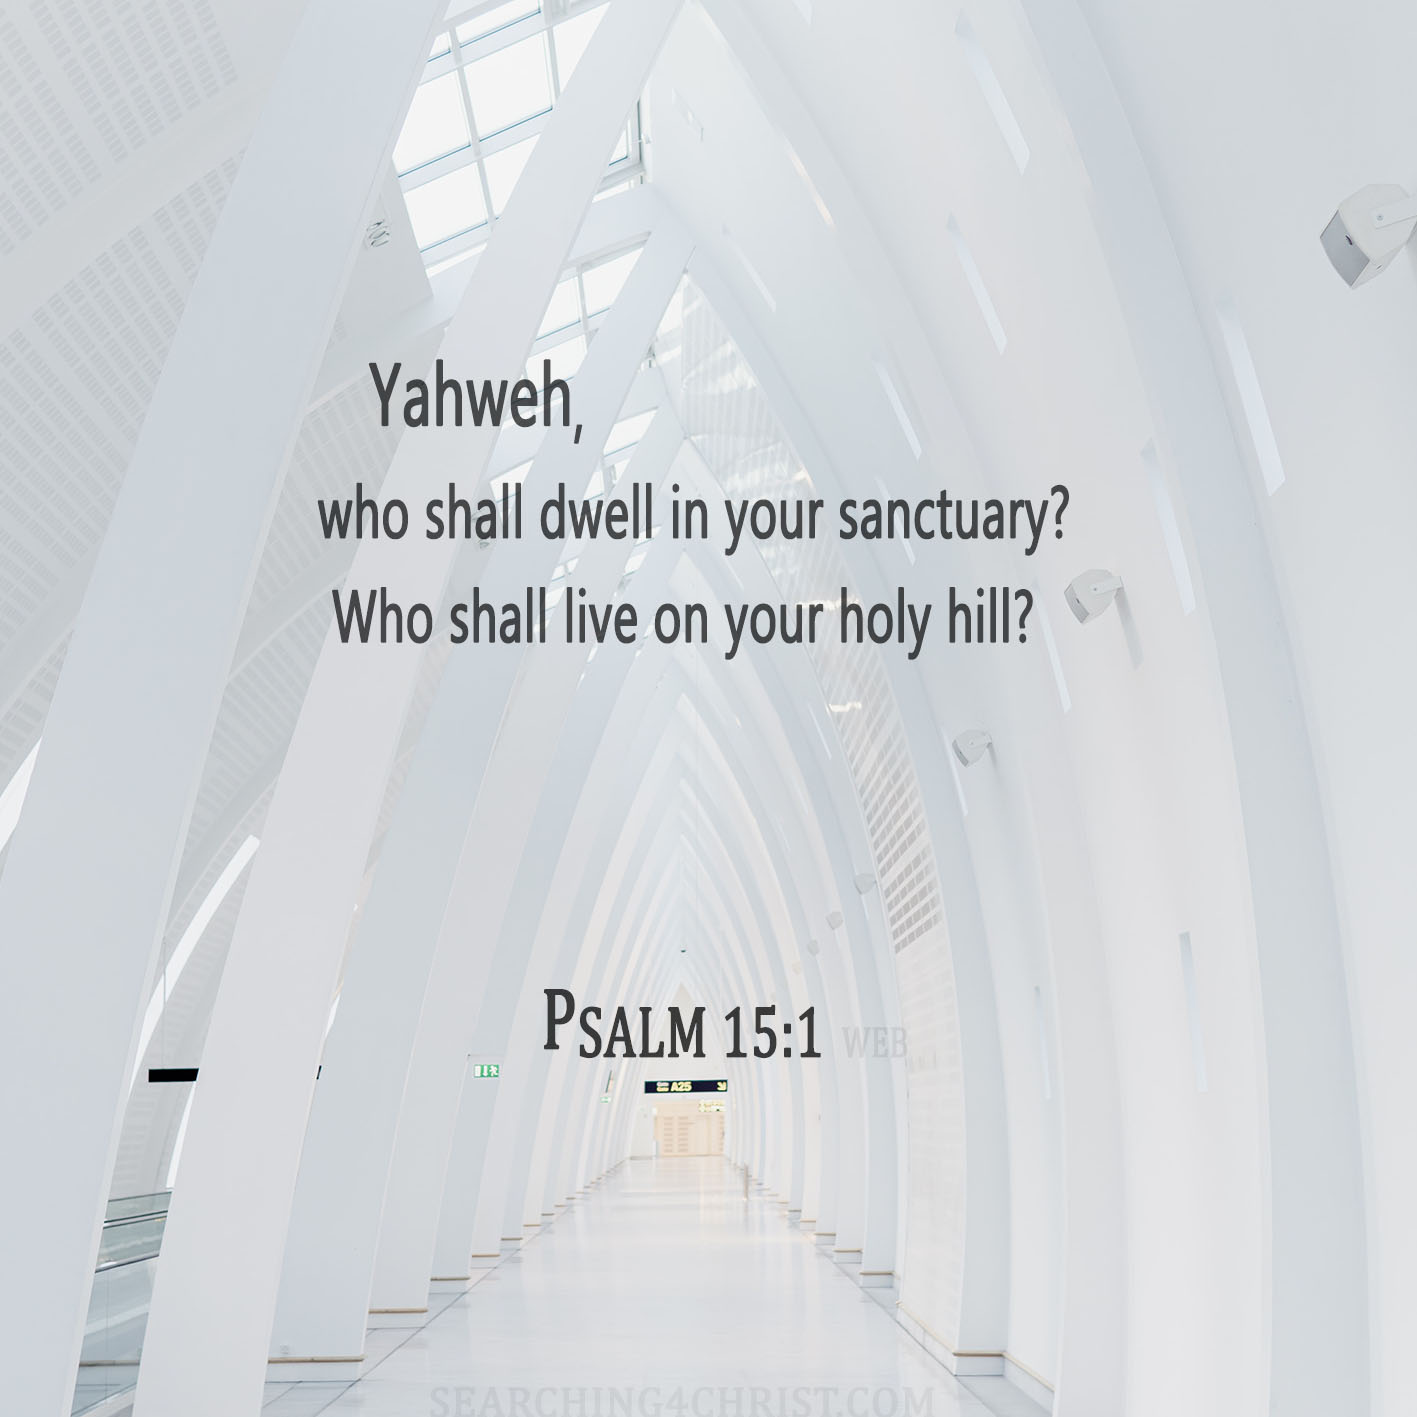 Yahweh, who shall dwell in your sanctuary? Who shall live on your holy hill? Psalm 15:1